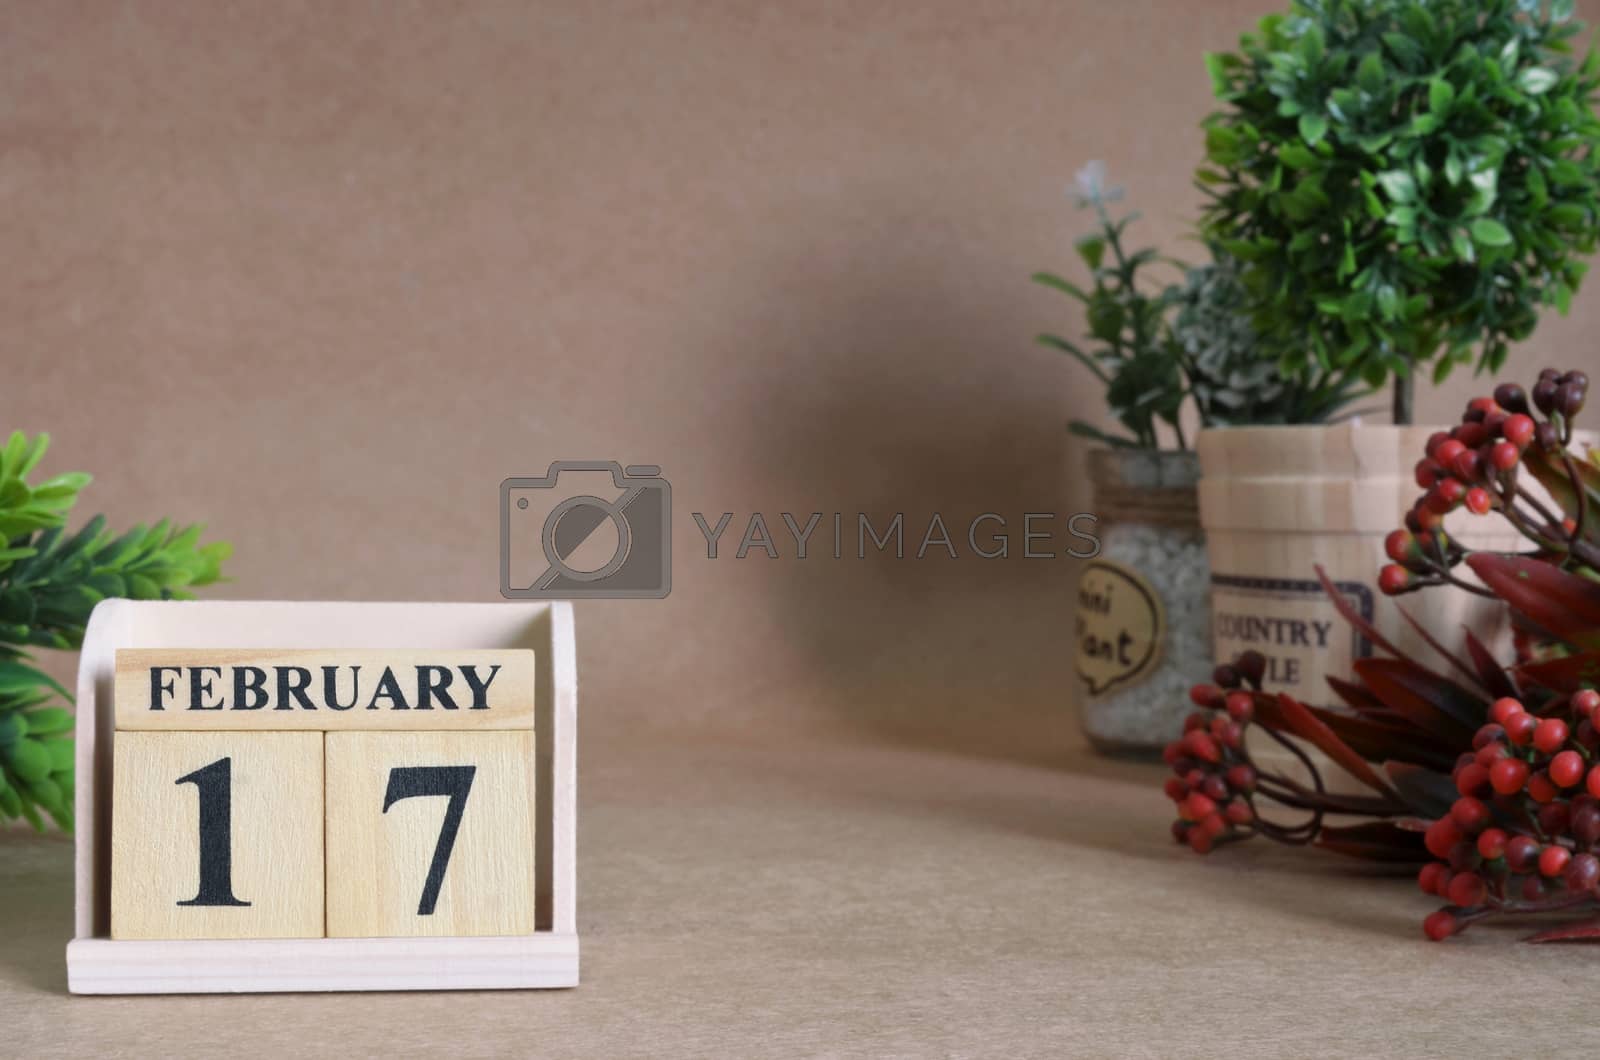 Royalty free image of February 17 by Mrfrost